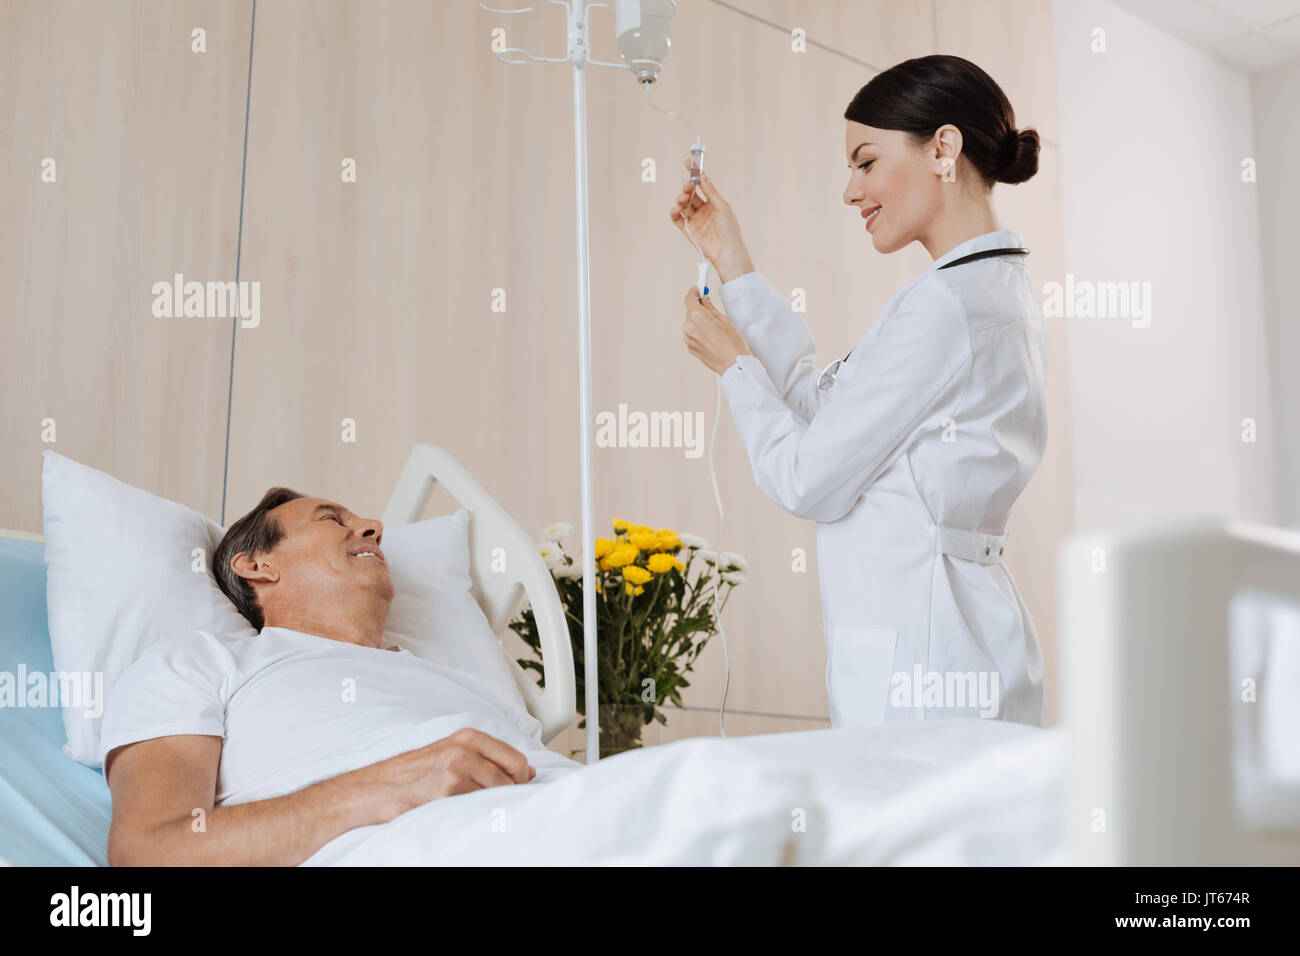 Cheerful experienced therapist interacting with her patient Stock Photo